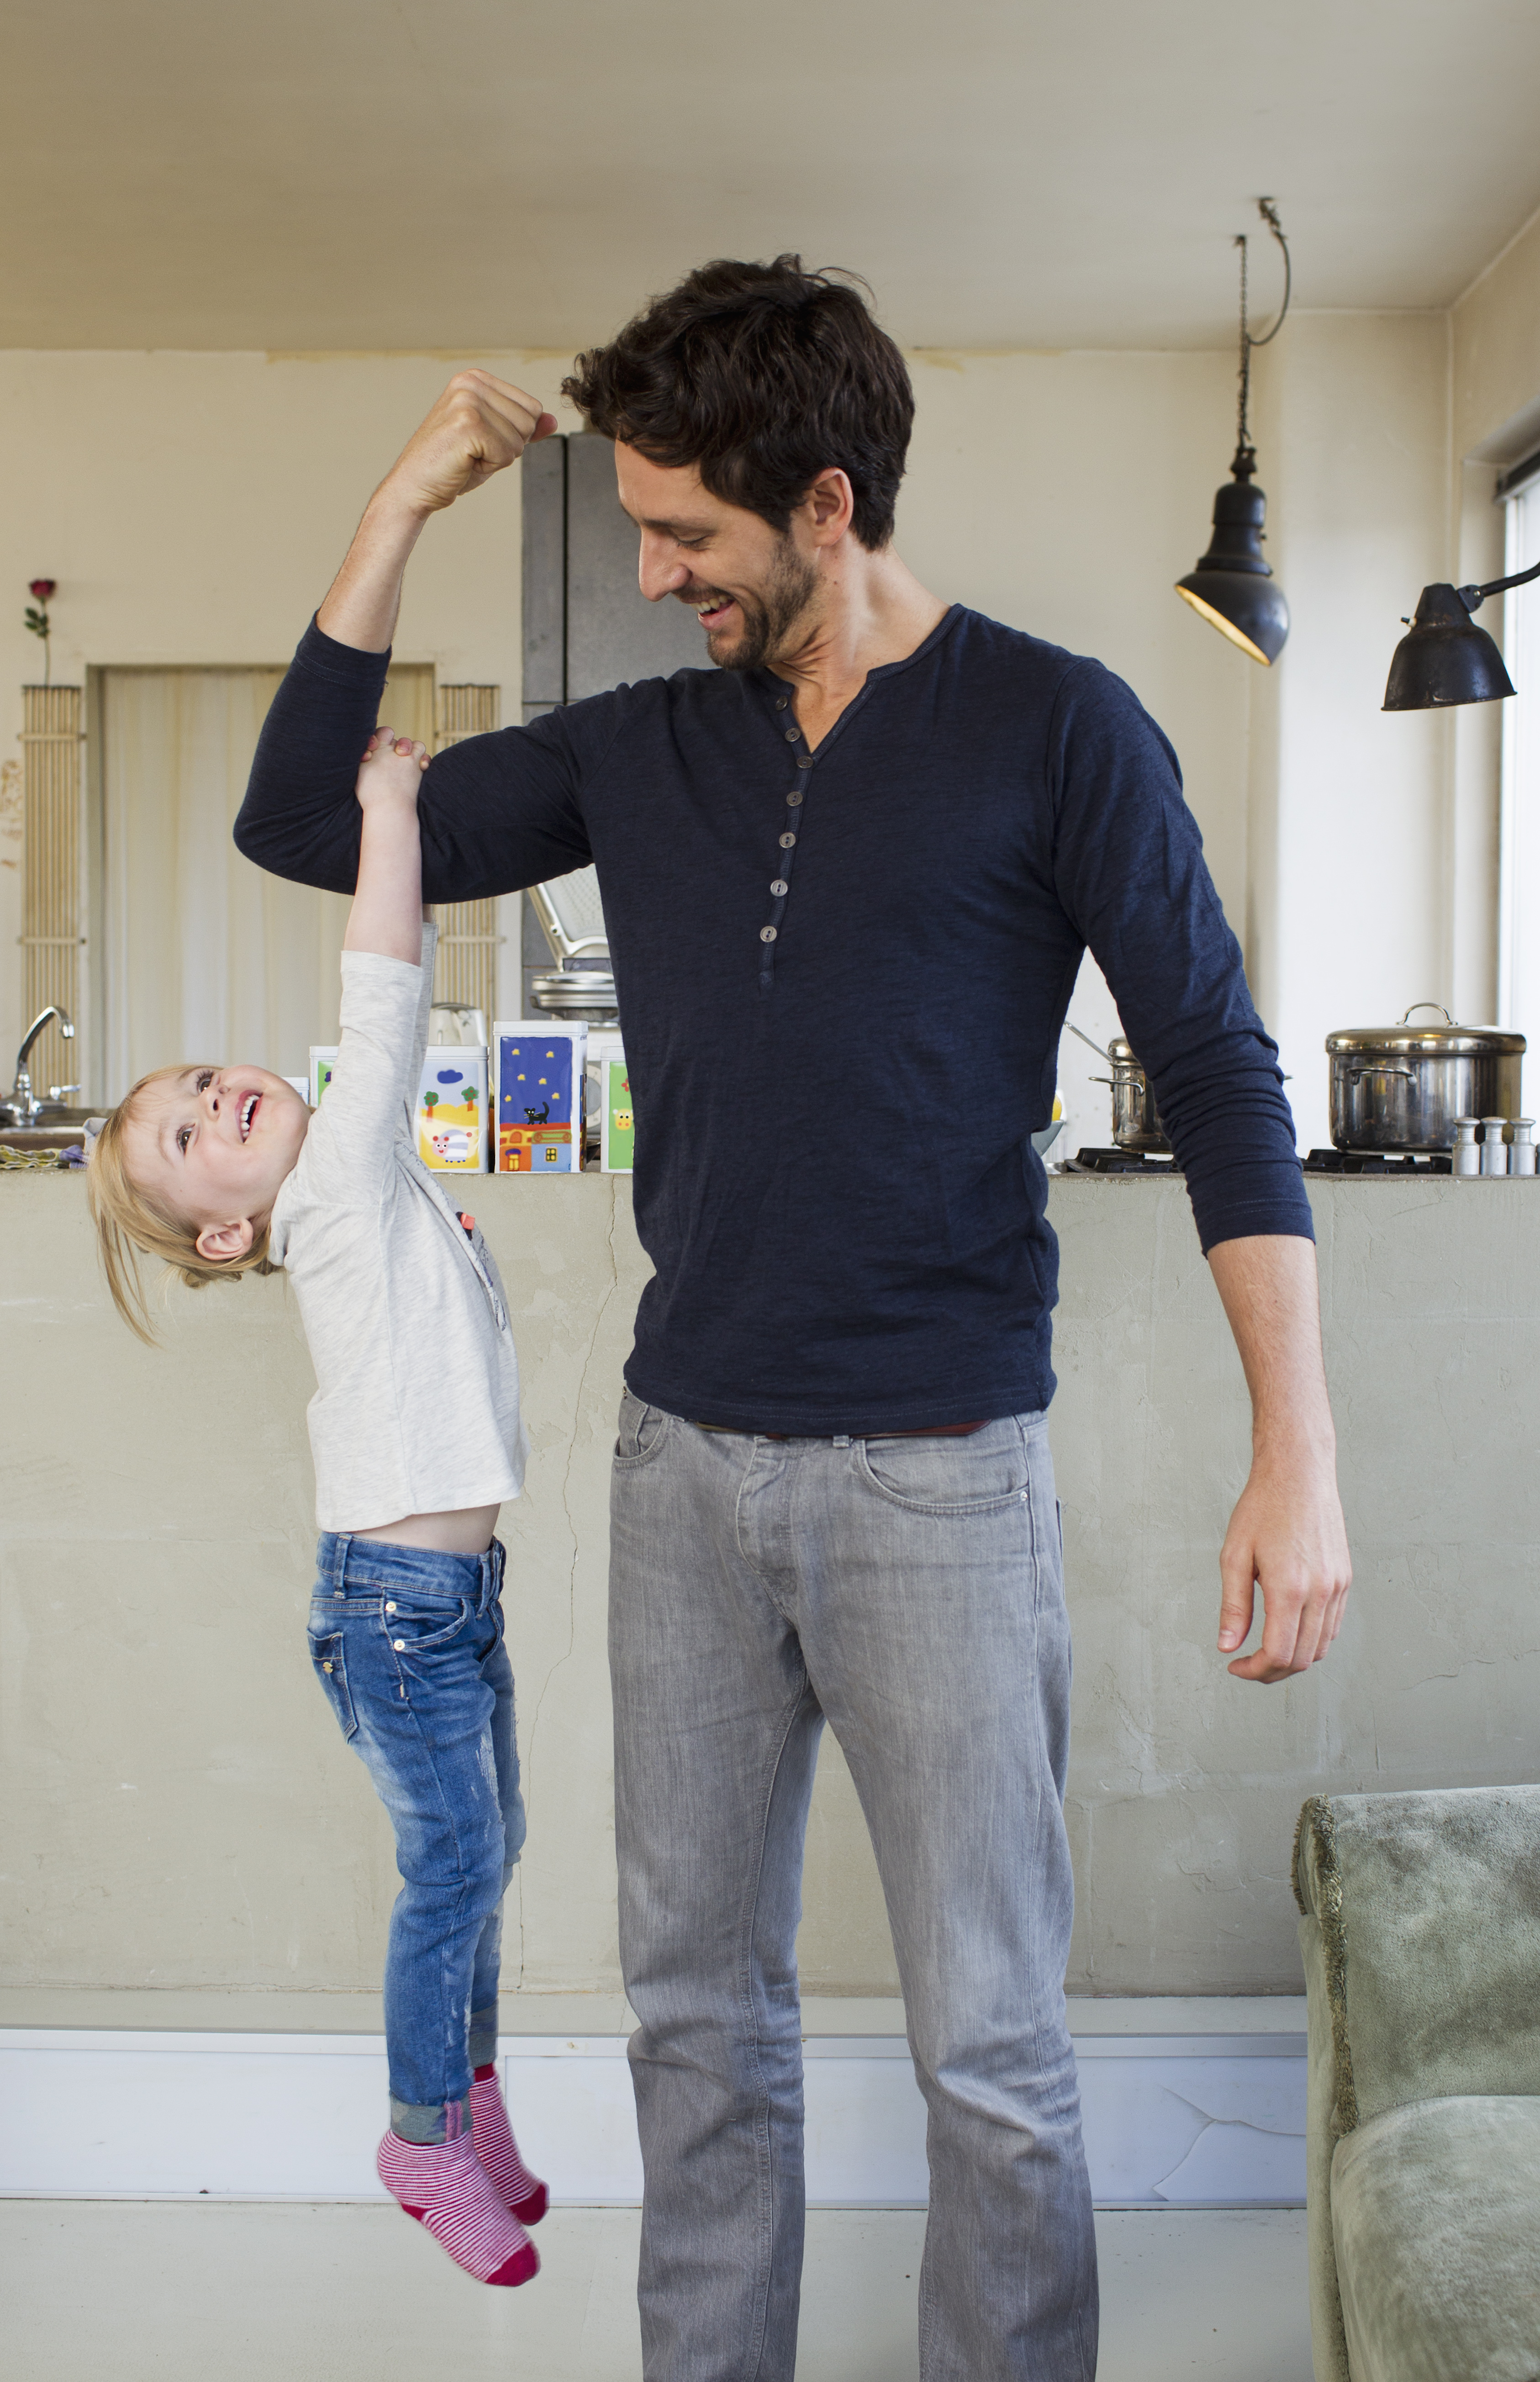 Young girl dangling from her fathers arm (Emely&mdash;Getty Images/Cultura RF)